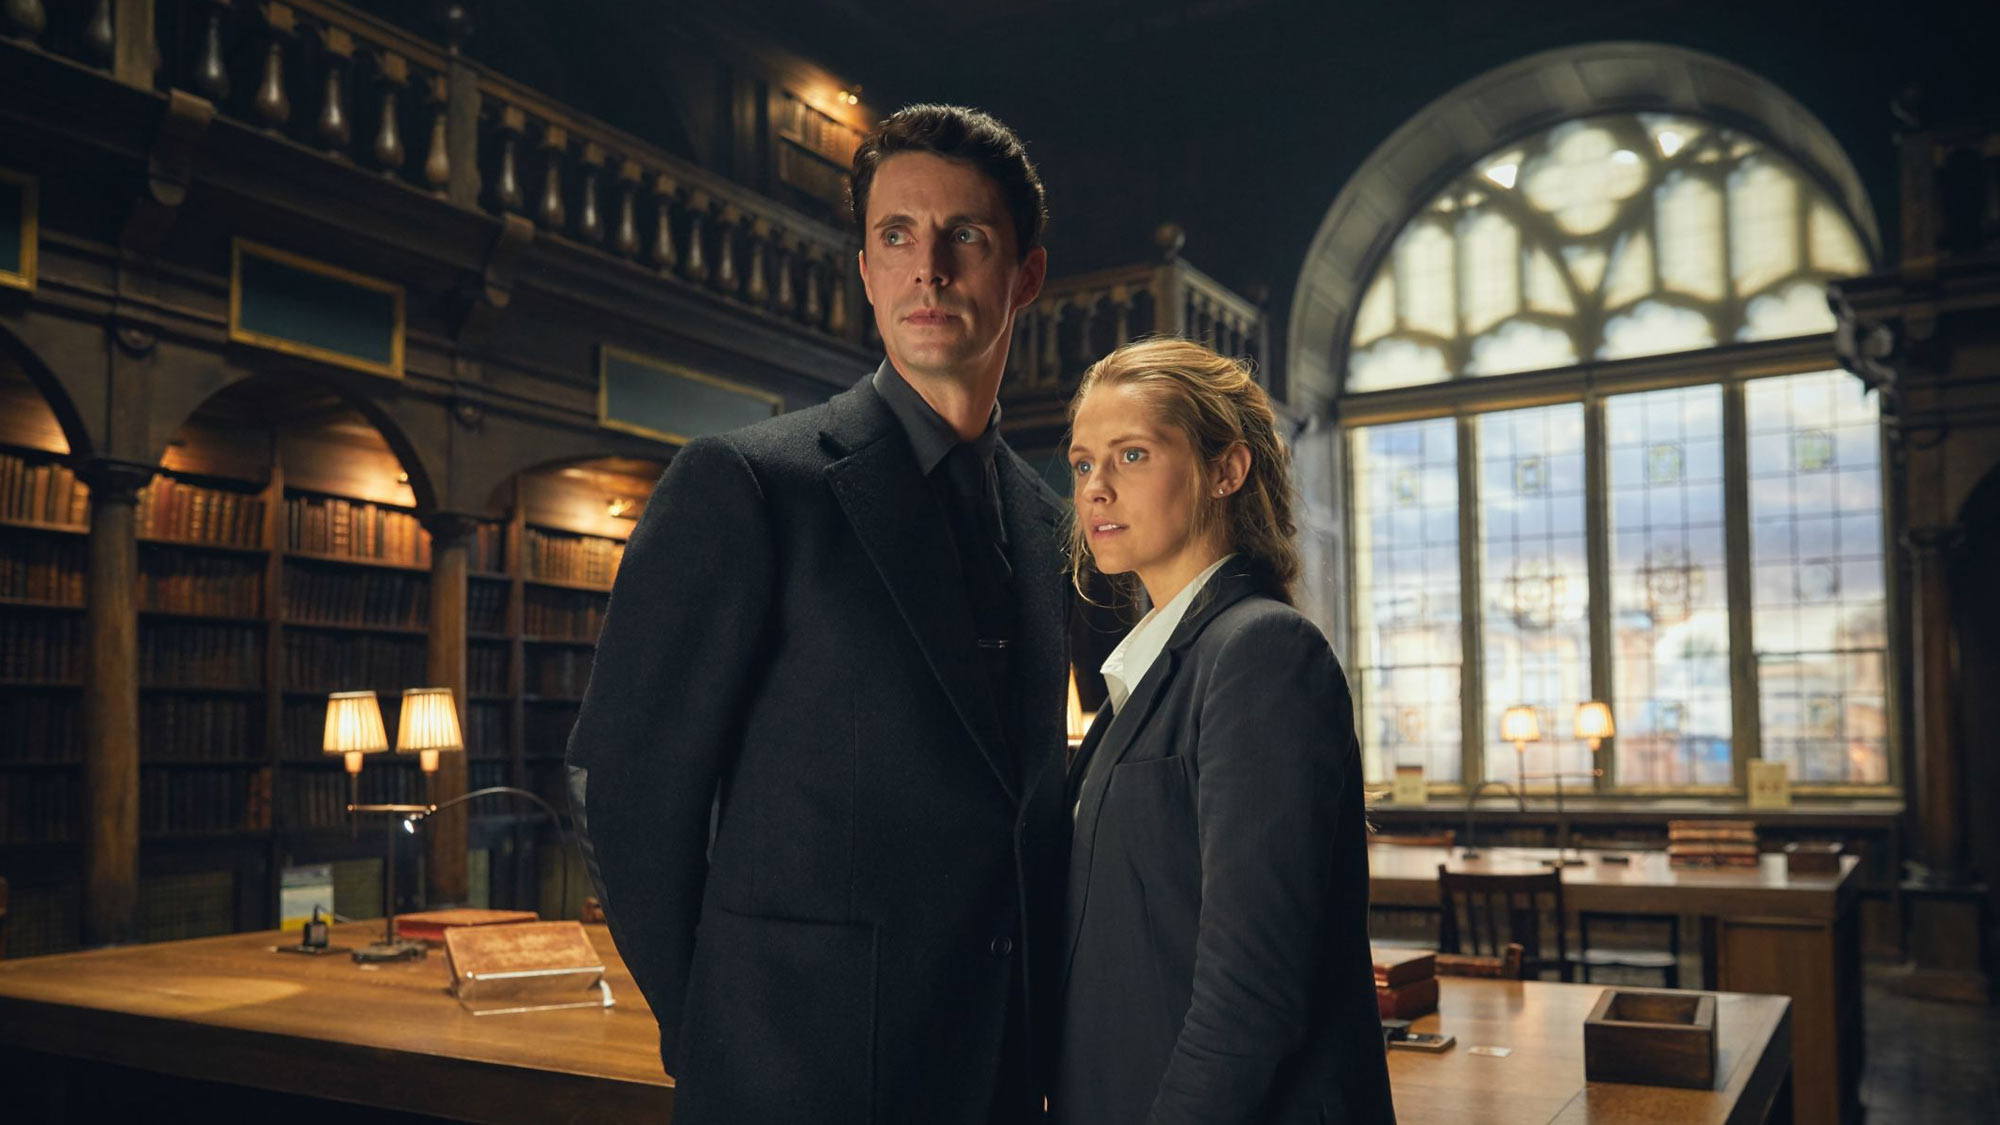 Matthew Goode and Teresa Palmer star in A Discovery of Witches